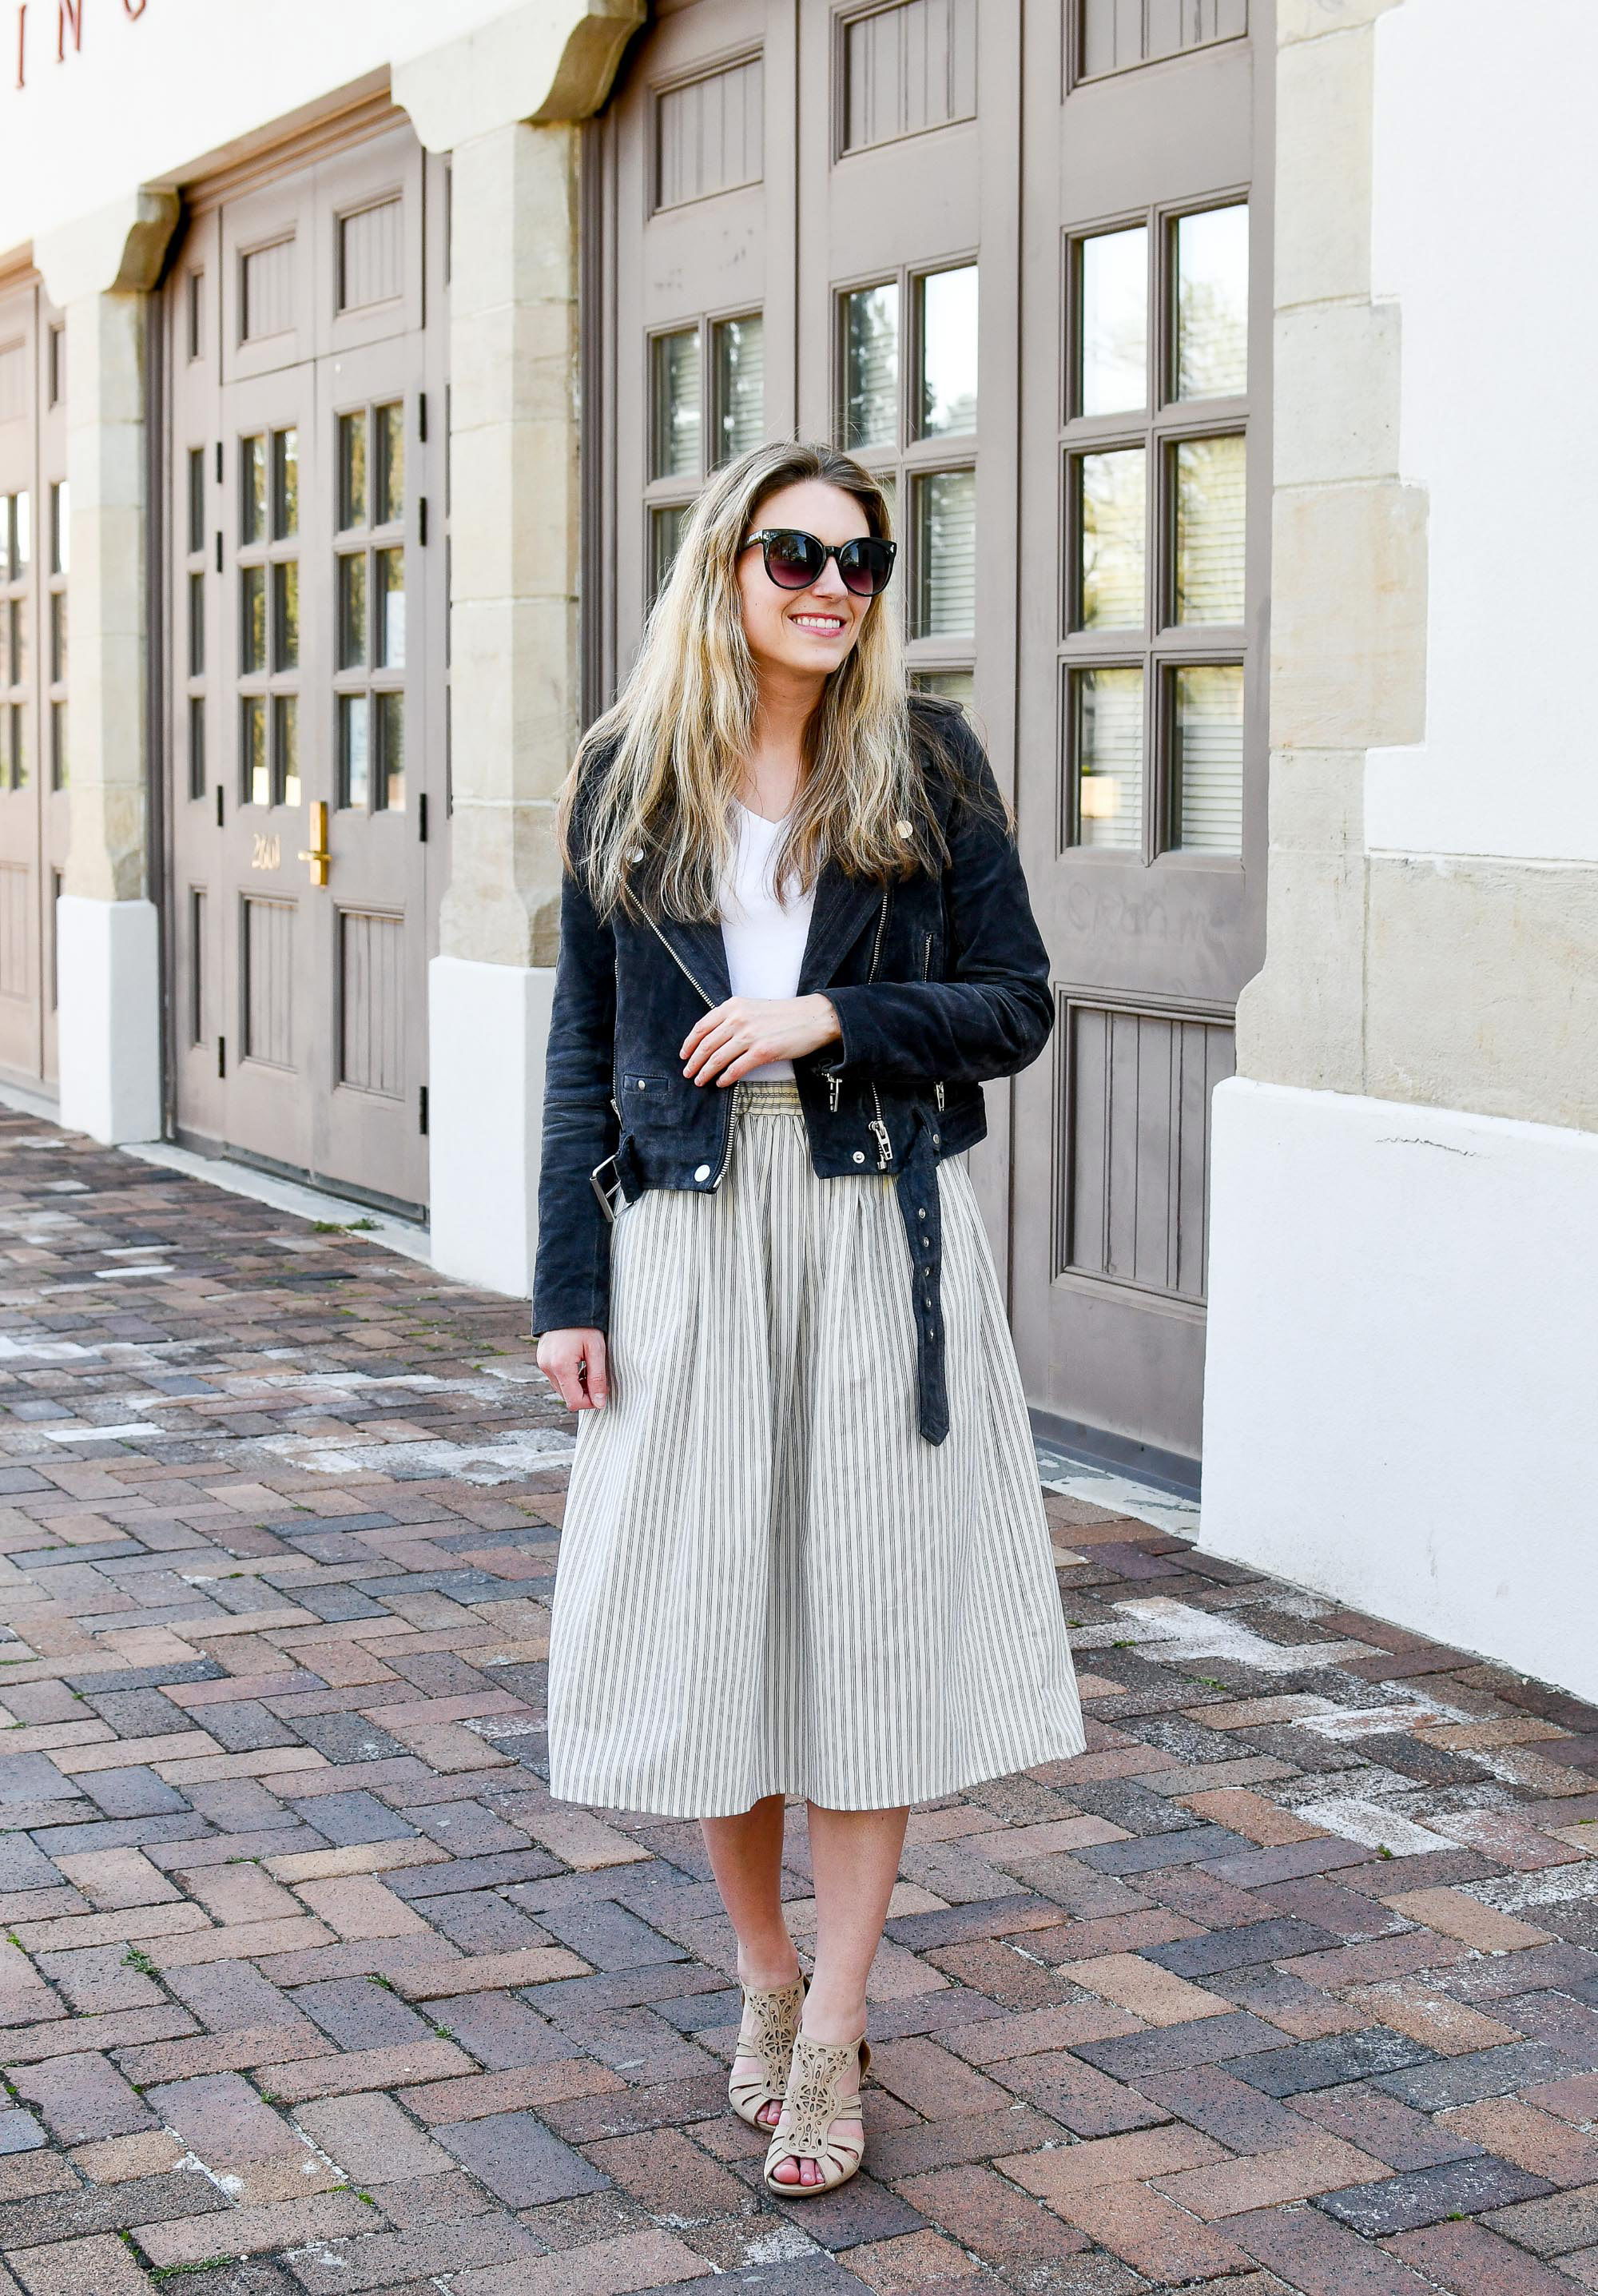 Favorite outfit: A little sweet, a little sassy — Cotton Cashmere Cat Hair